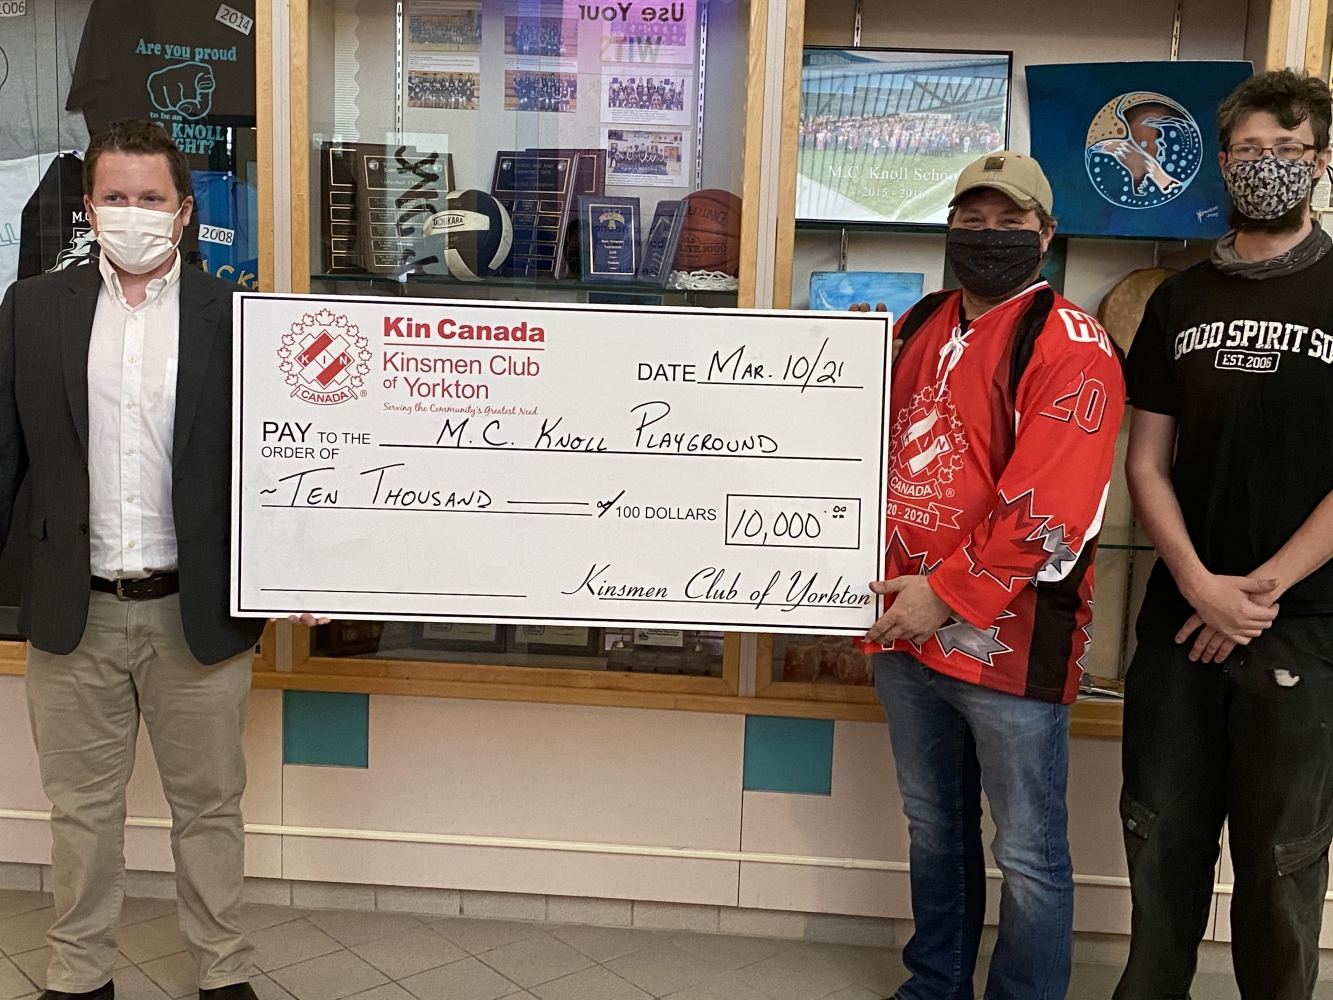 M.C. Knoll Playground receives $10,000 boost from Kinsmen